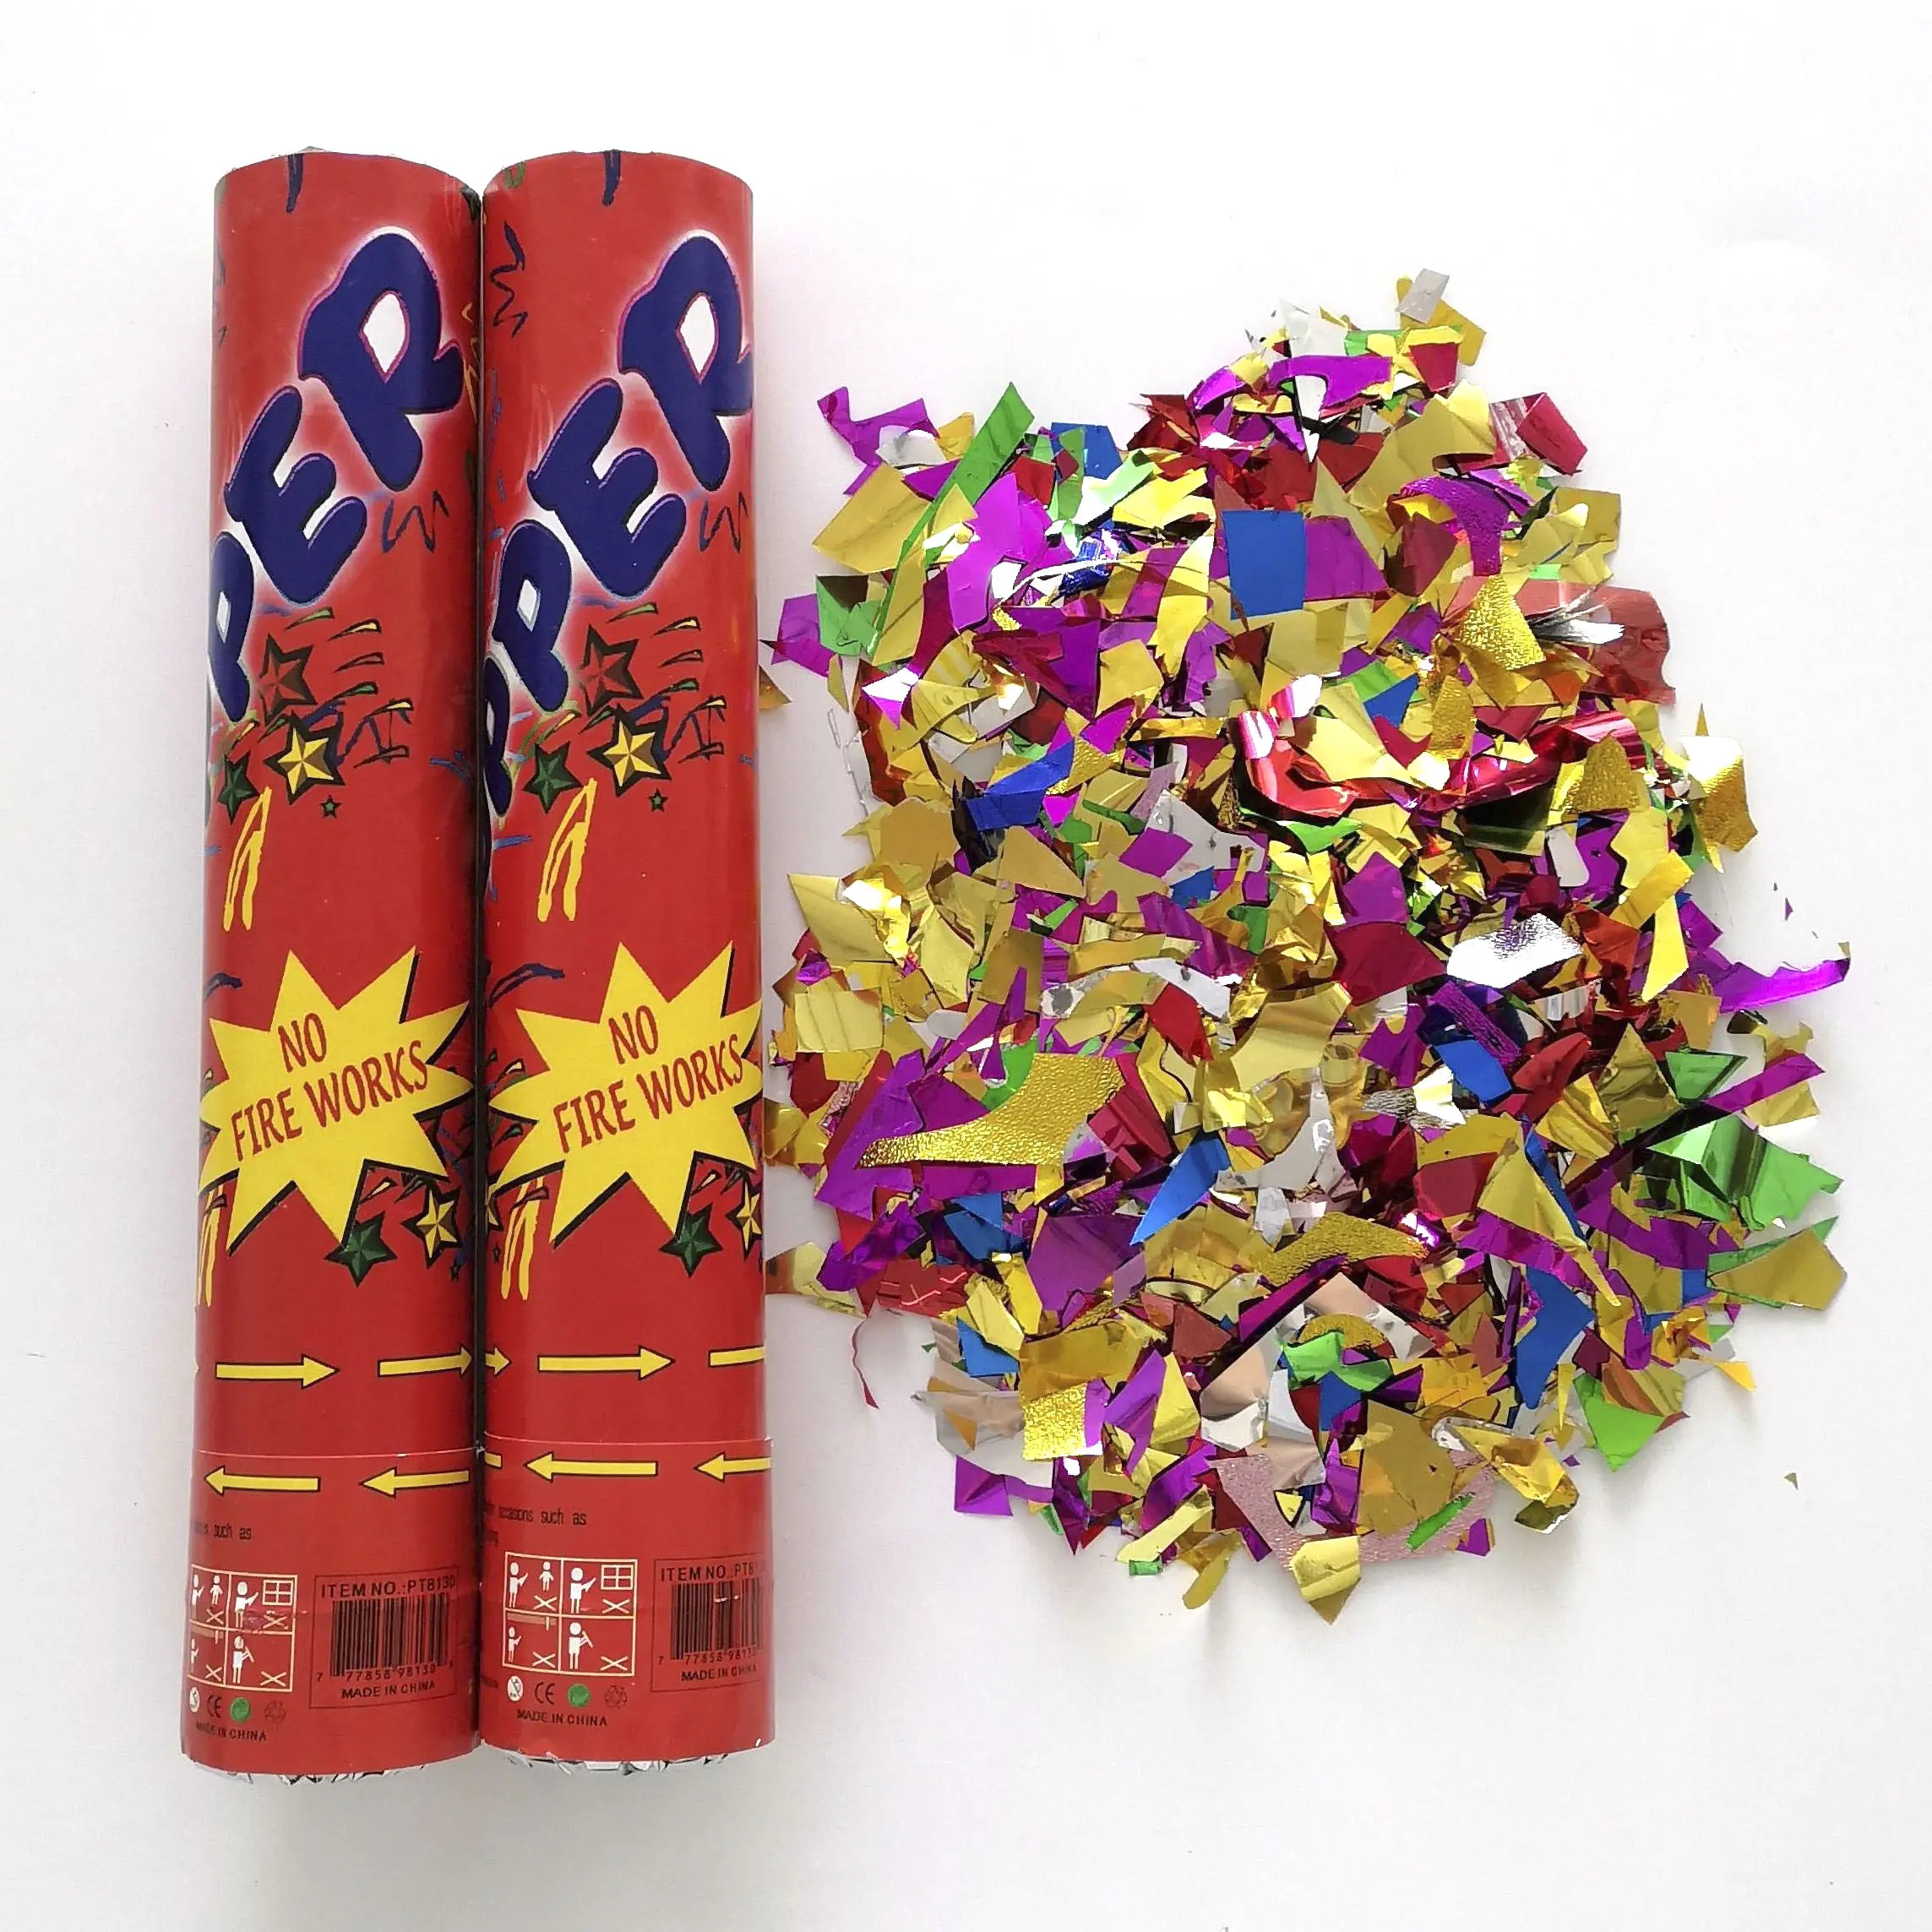 Party Popper Confetti Wholesale High Quality Foil Confetti Party Popper Confetti Cannon For Wedding Birthday Party Decorations